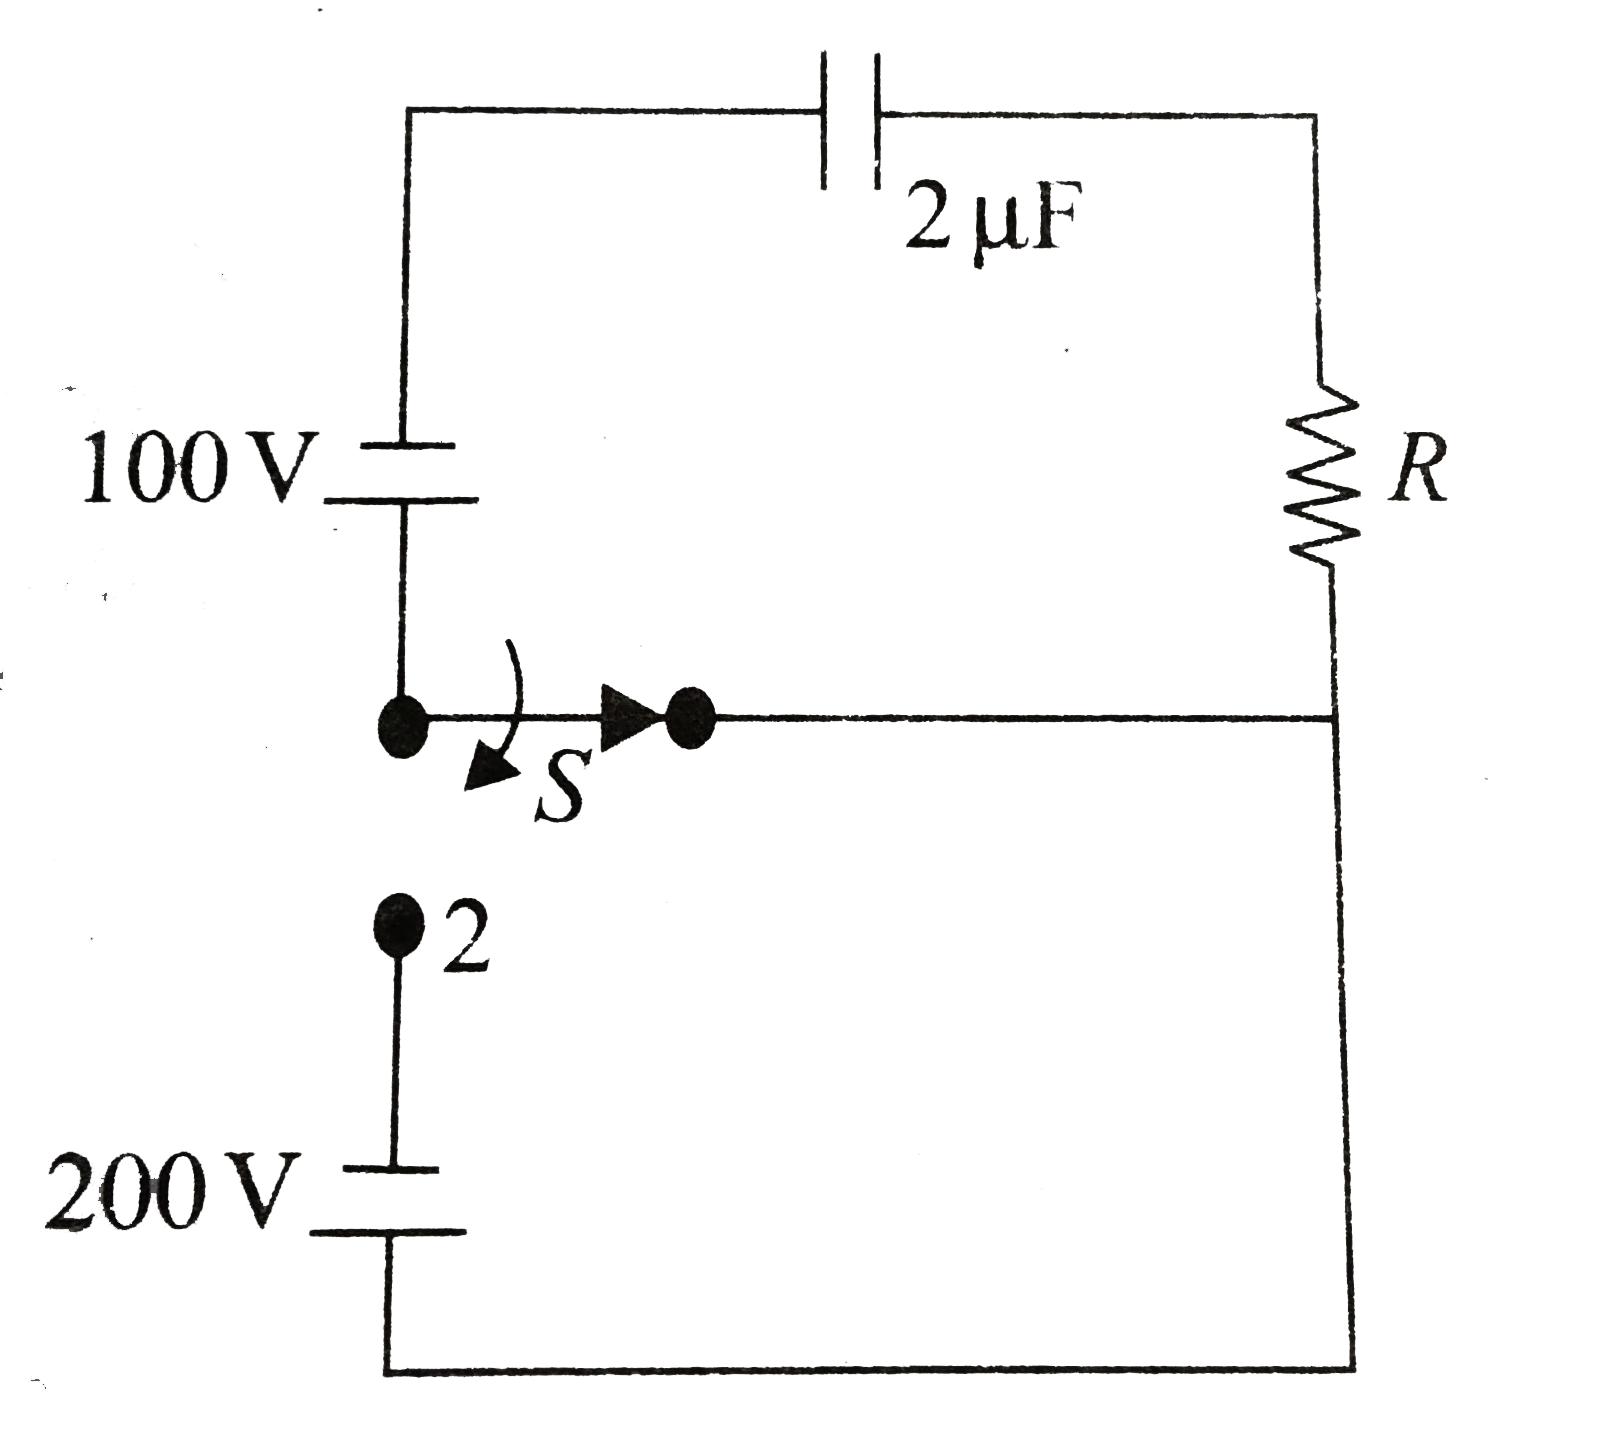 In the circuit shown in the figure, the switch S is in position 1 for a long time. Now the switch is thrown to position 2. Find the total heat developed  in the circuit till the steady state is reached again.